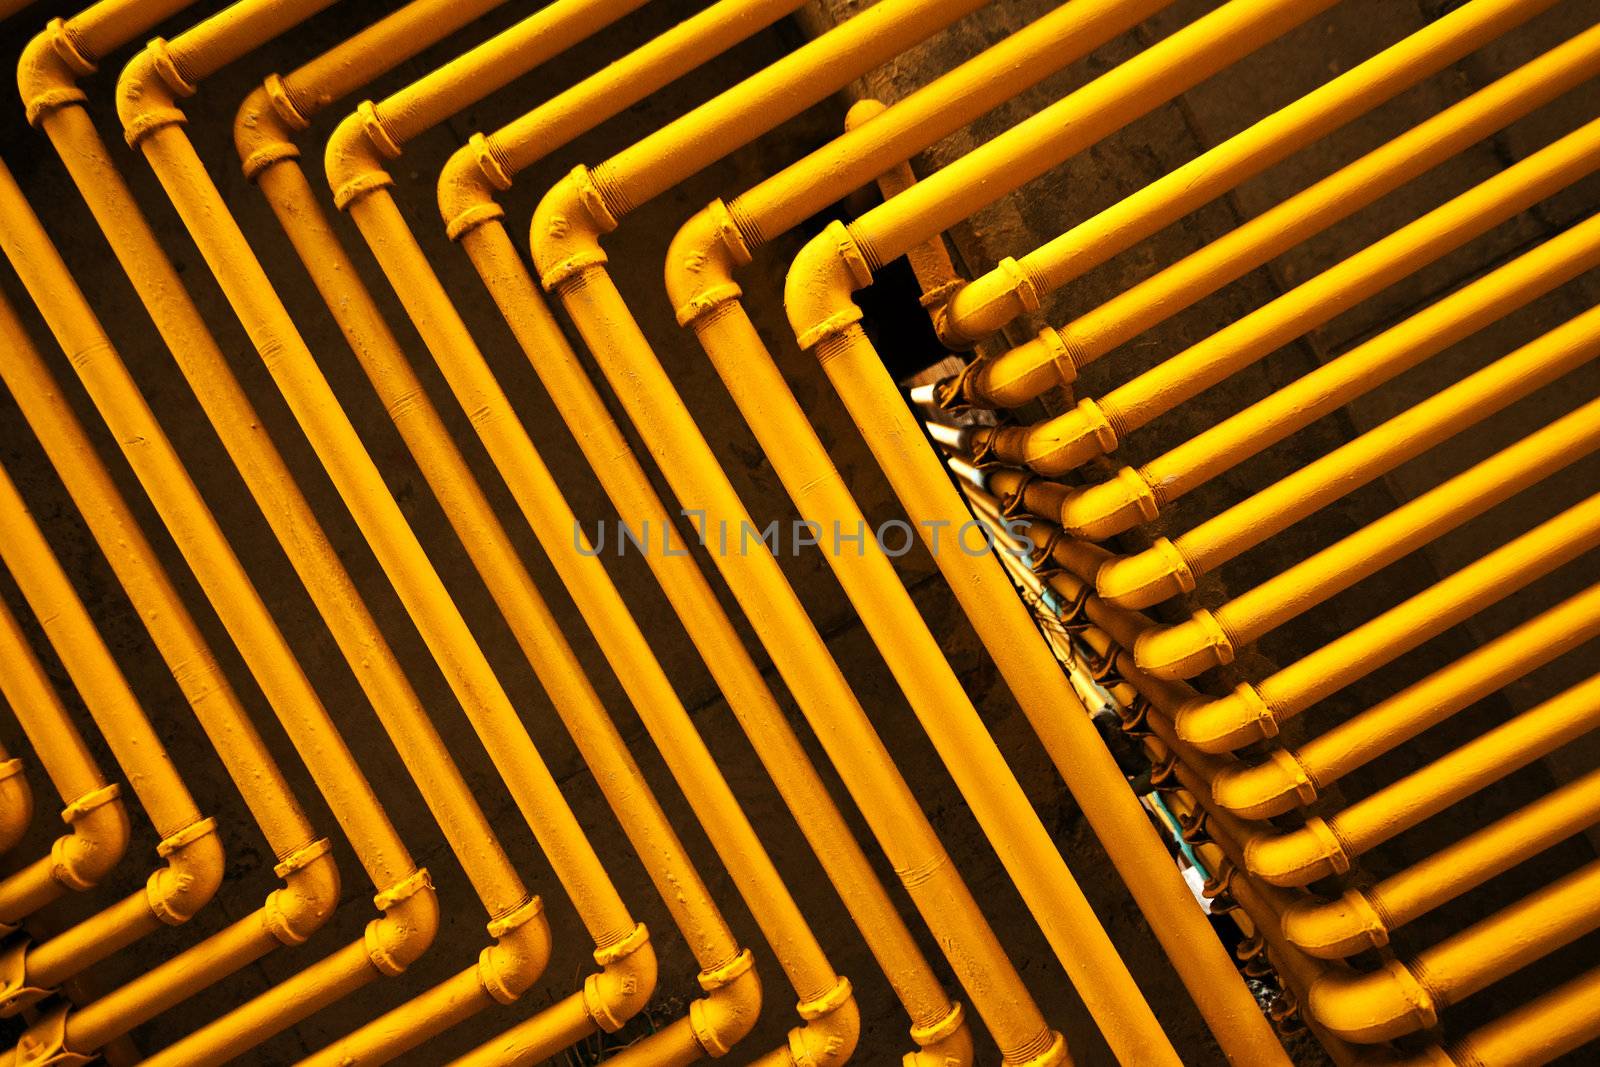 An image of yellow pipes forming an interesting pattern.